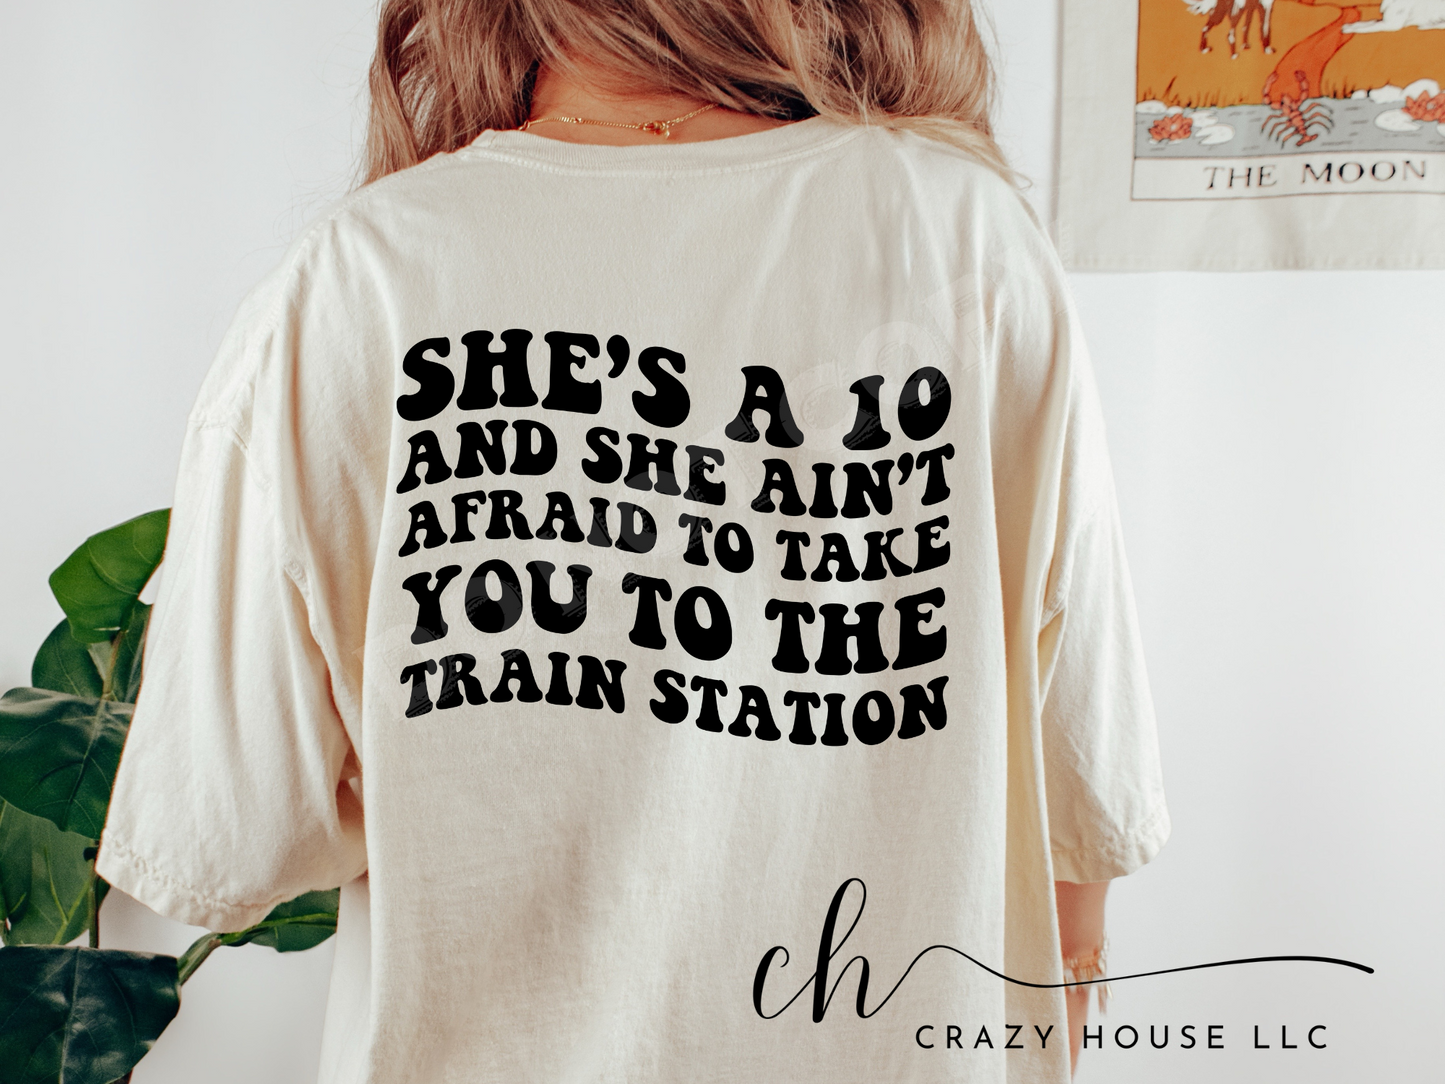 She's a 10 but  ... Train Station